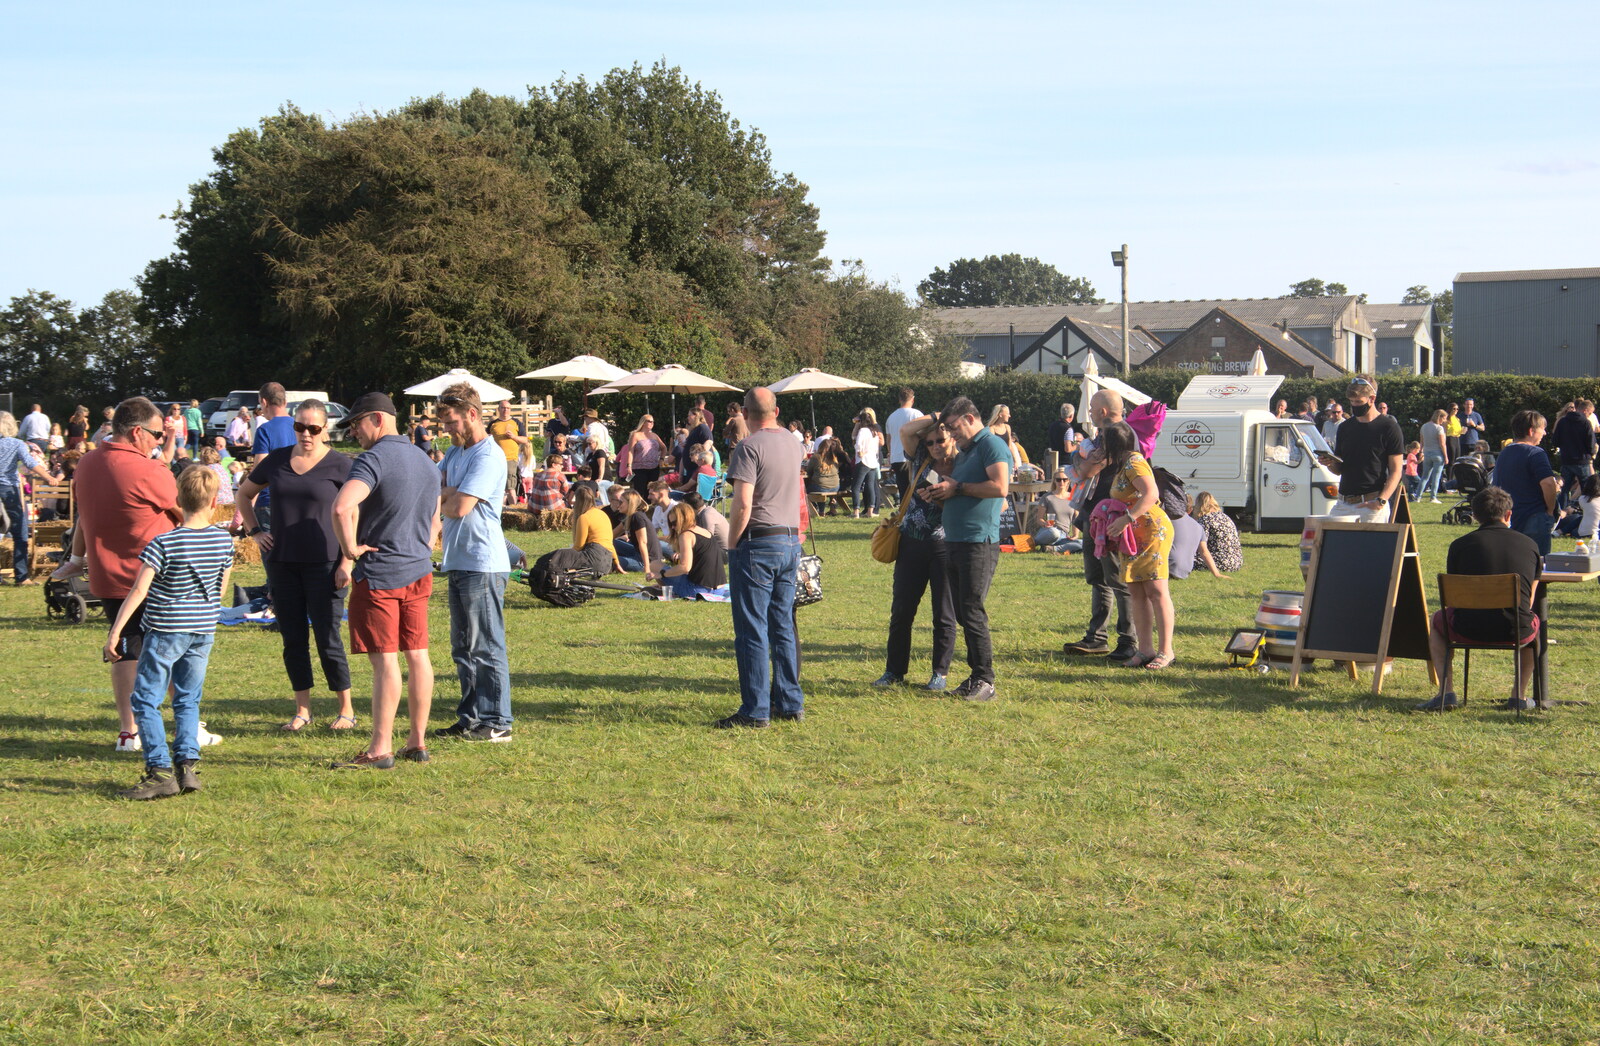 The queue gets even longer from Star Wing's Hops and Hogs Festival, Redgrave, Suffolk - 12th September 2020